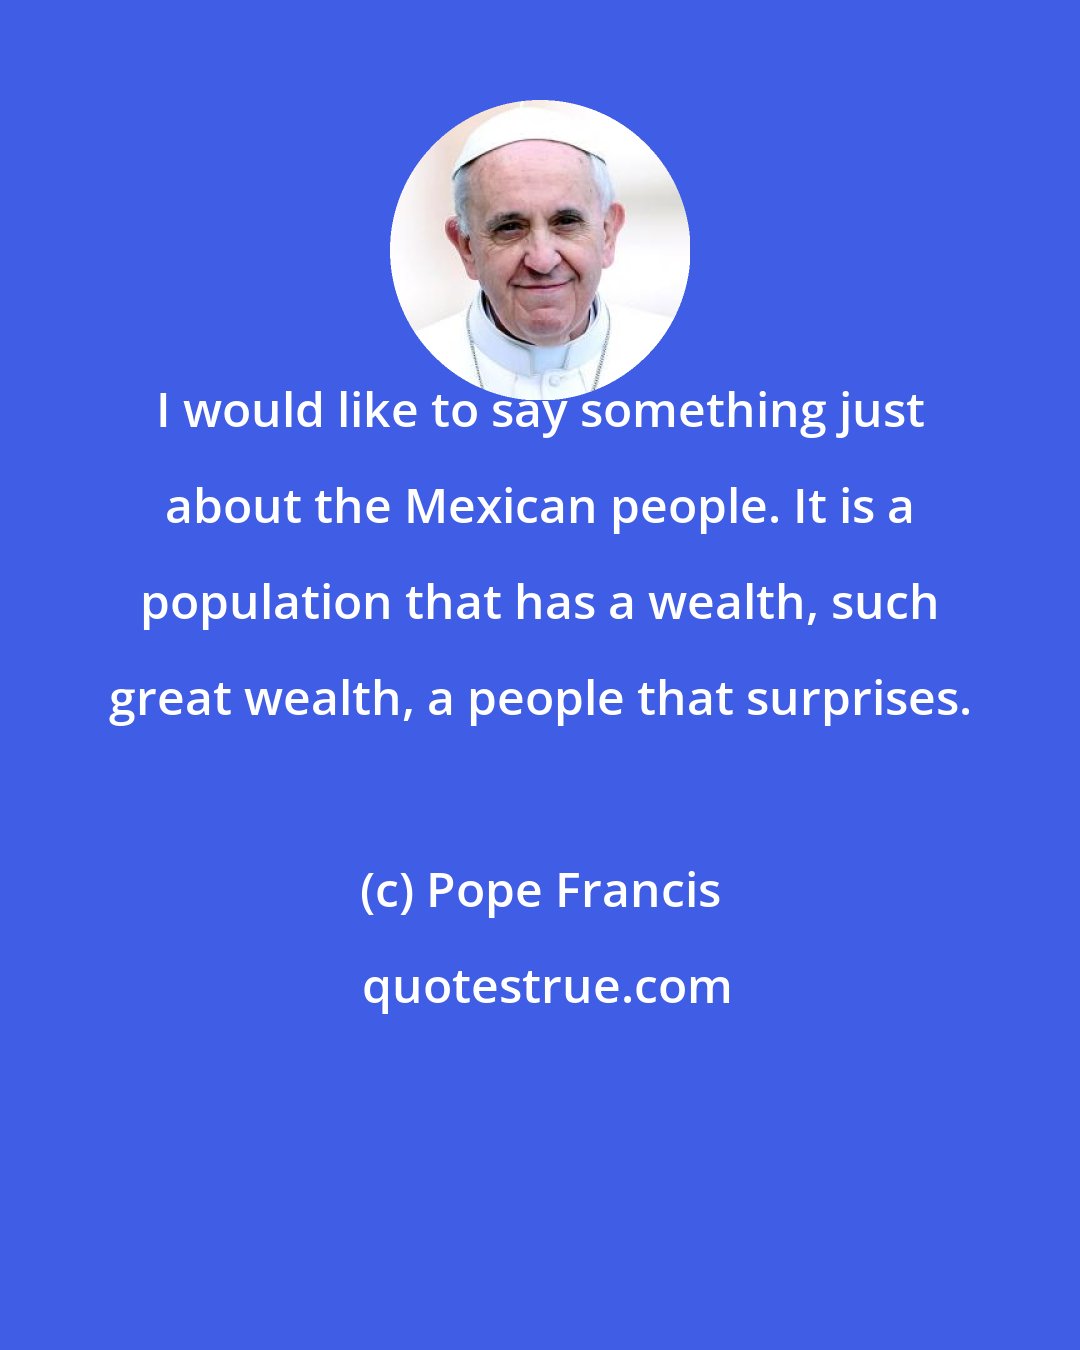 Pope Francis: I would like to say something just about the Mexican people. It is a population that has a wealth, such great wealth, a people that surprises.